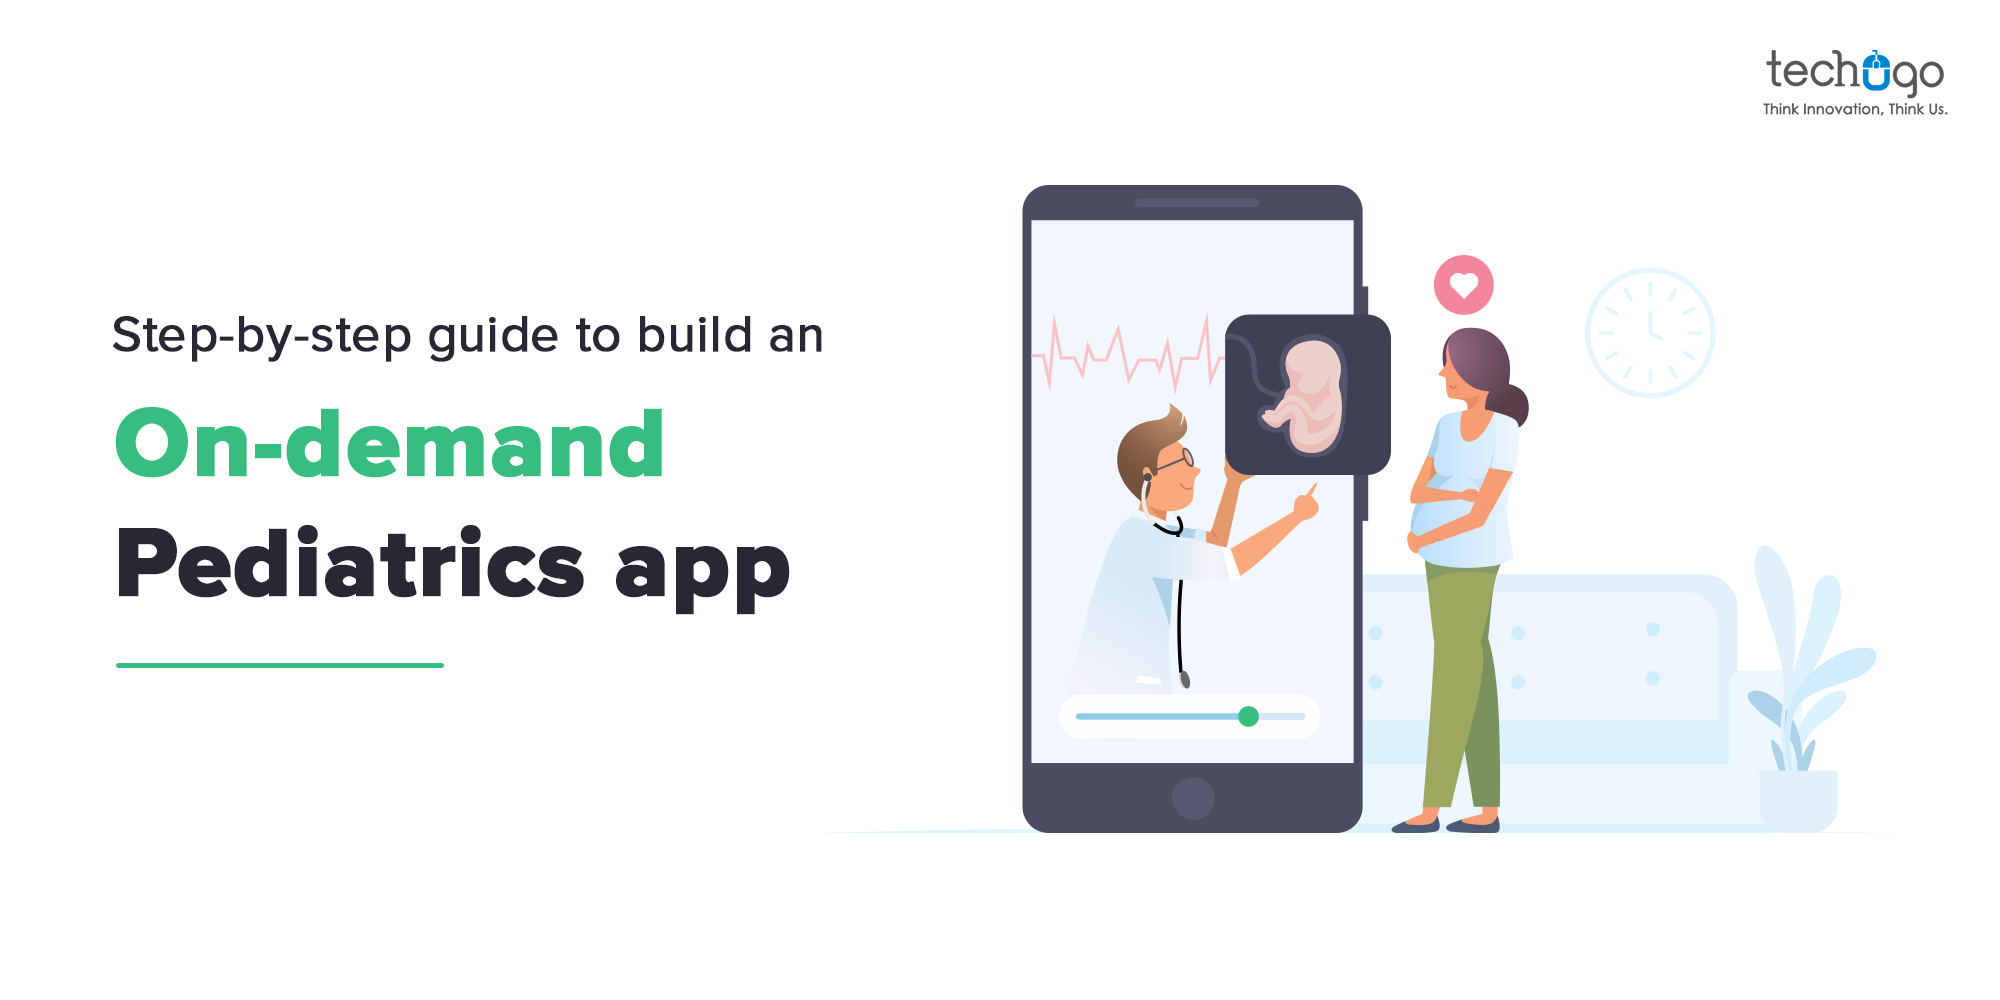 A Step-By-Step Guide To Build An On-Demand Pediatrics App